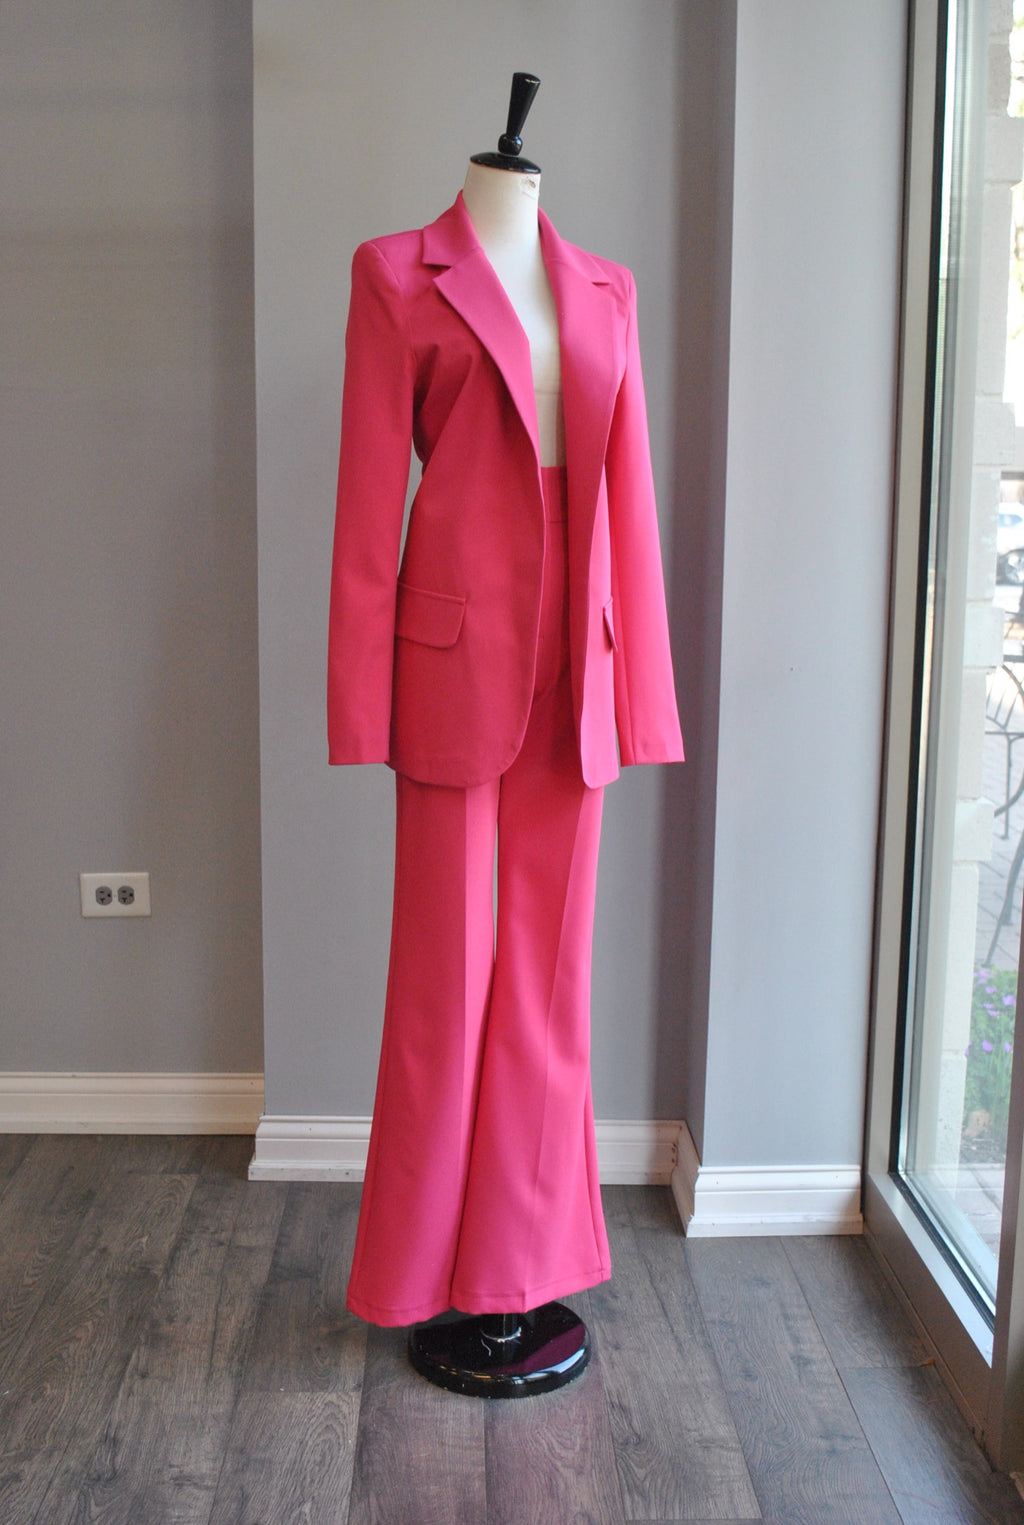 FUCHSIA PINK SUIT OF FLAIR PANTS AND OVERSIZED BLAZER